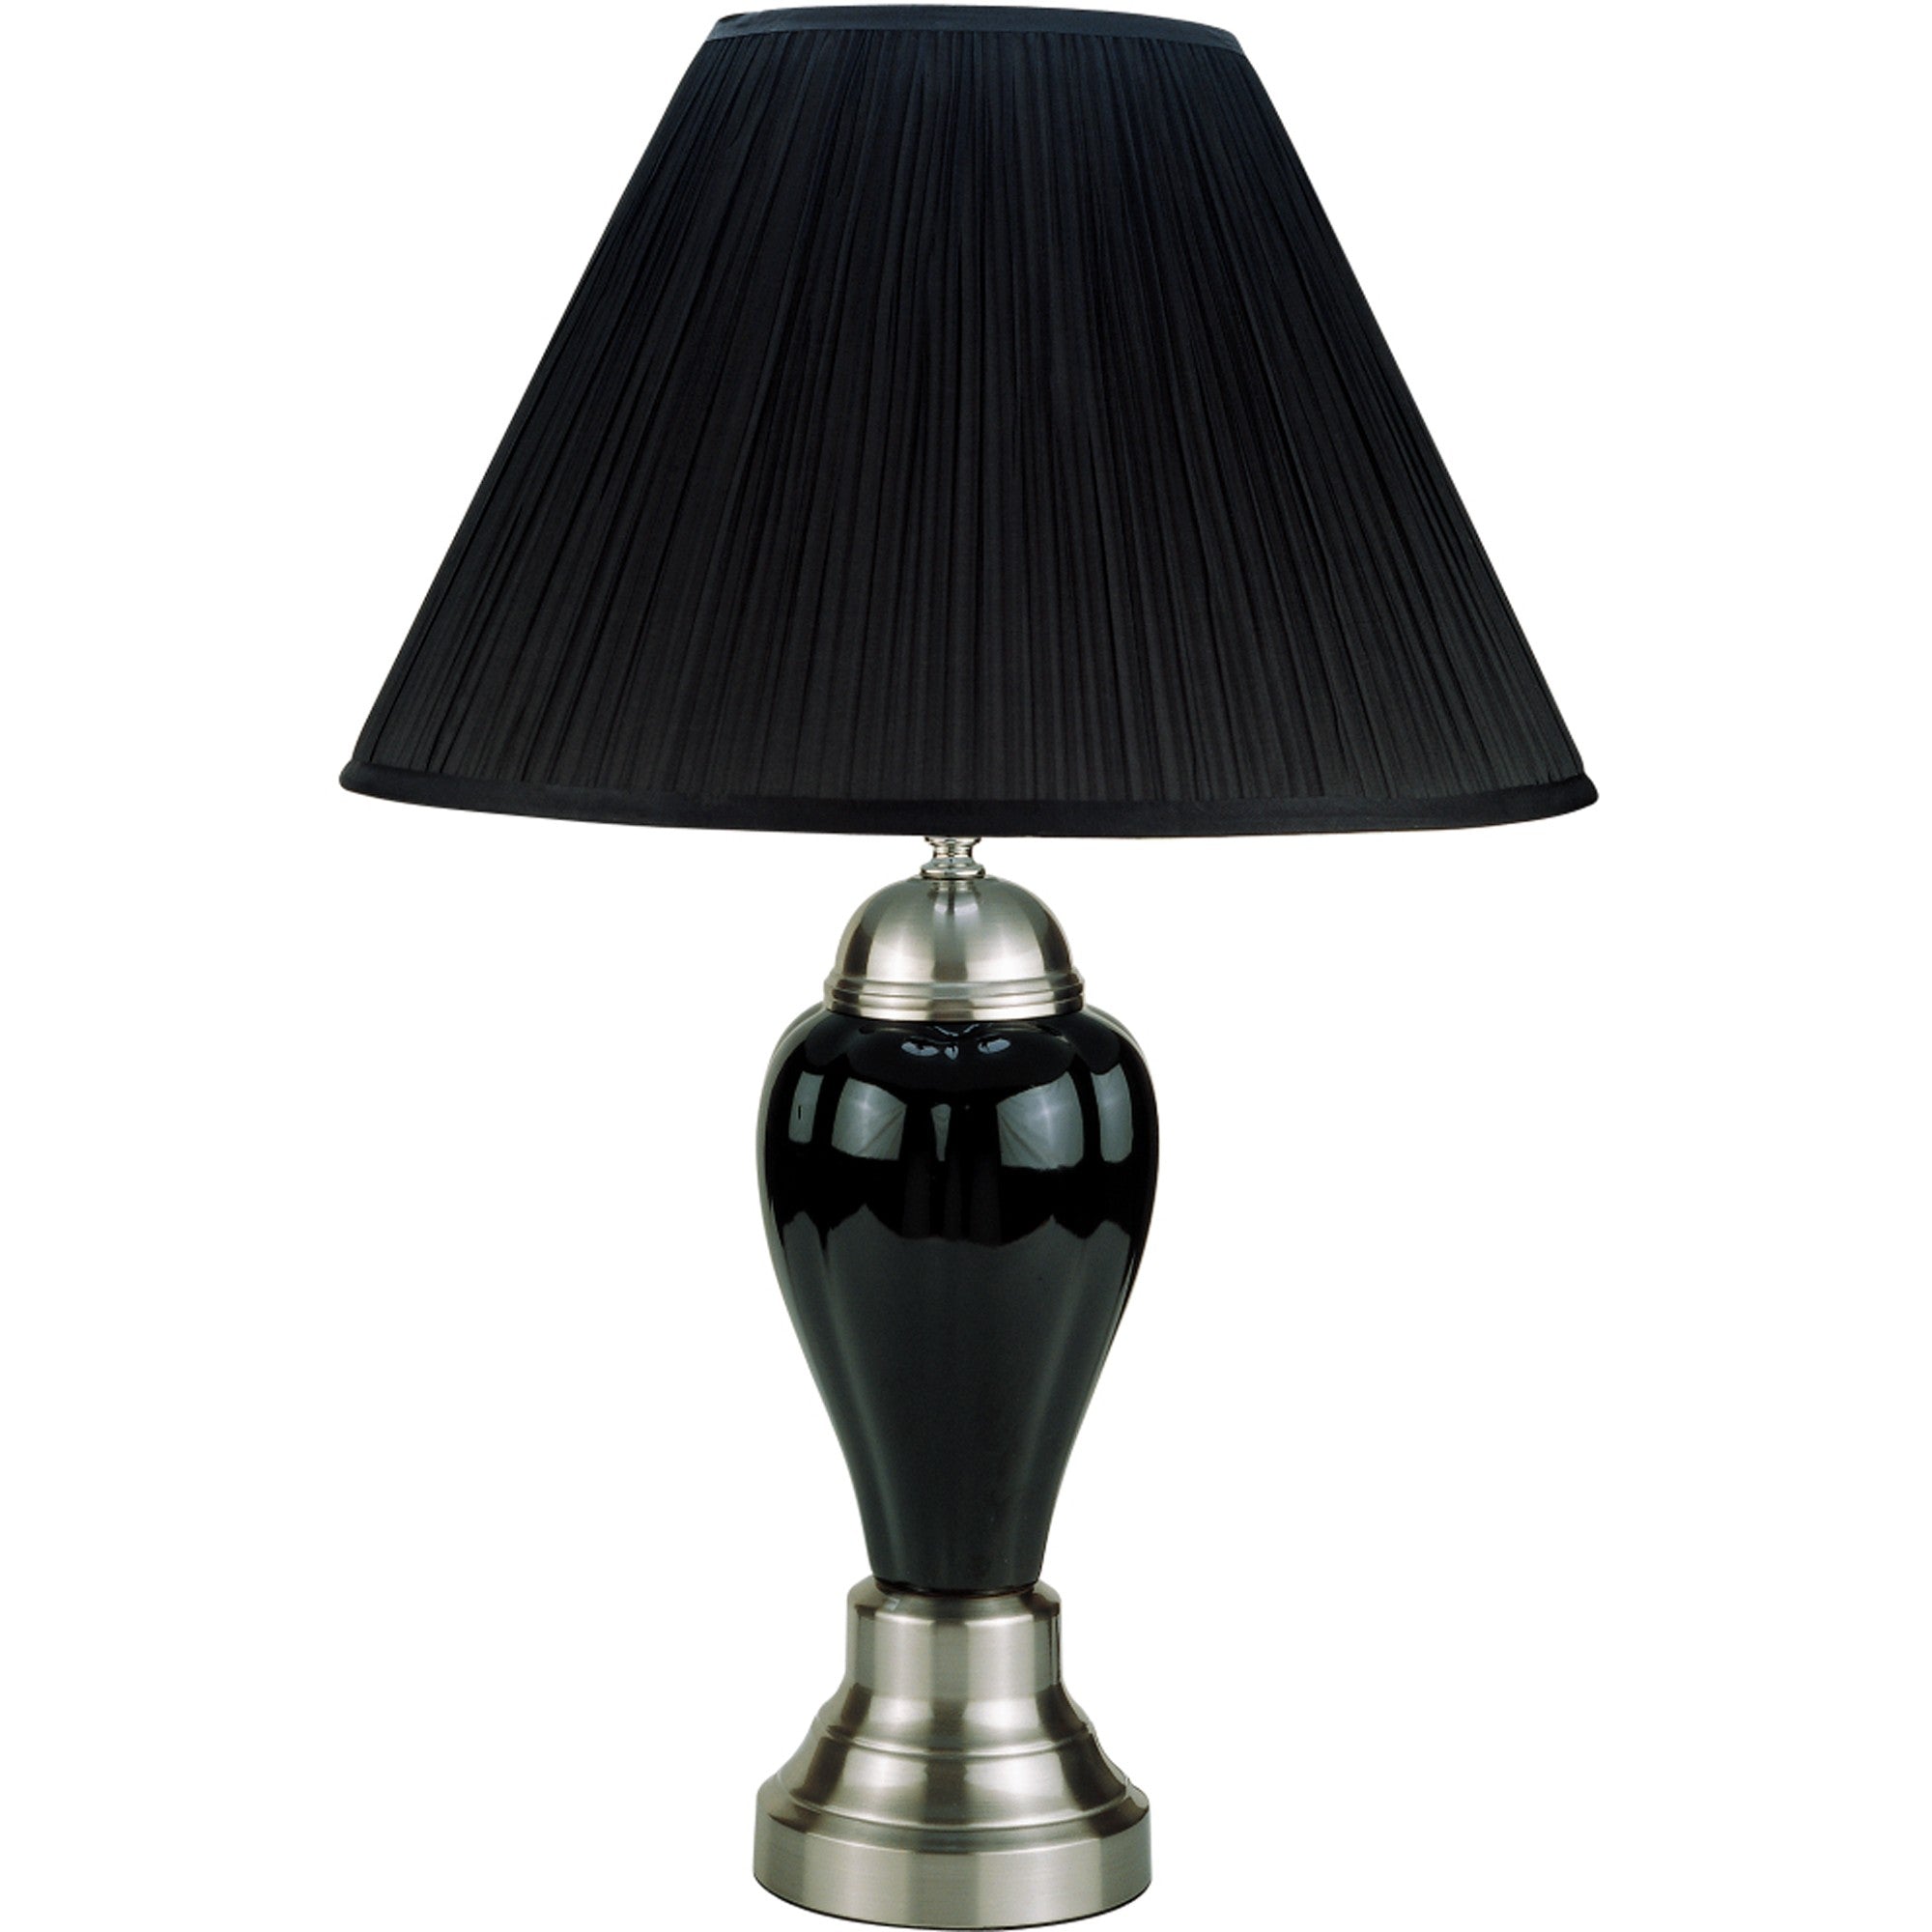 27" Black and Silver Ceramic Urn Table Lamp With Black Empire Shade